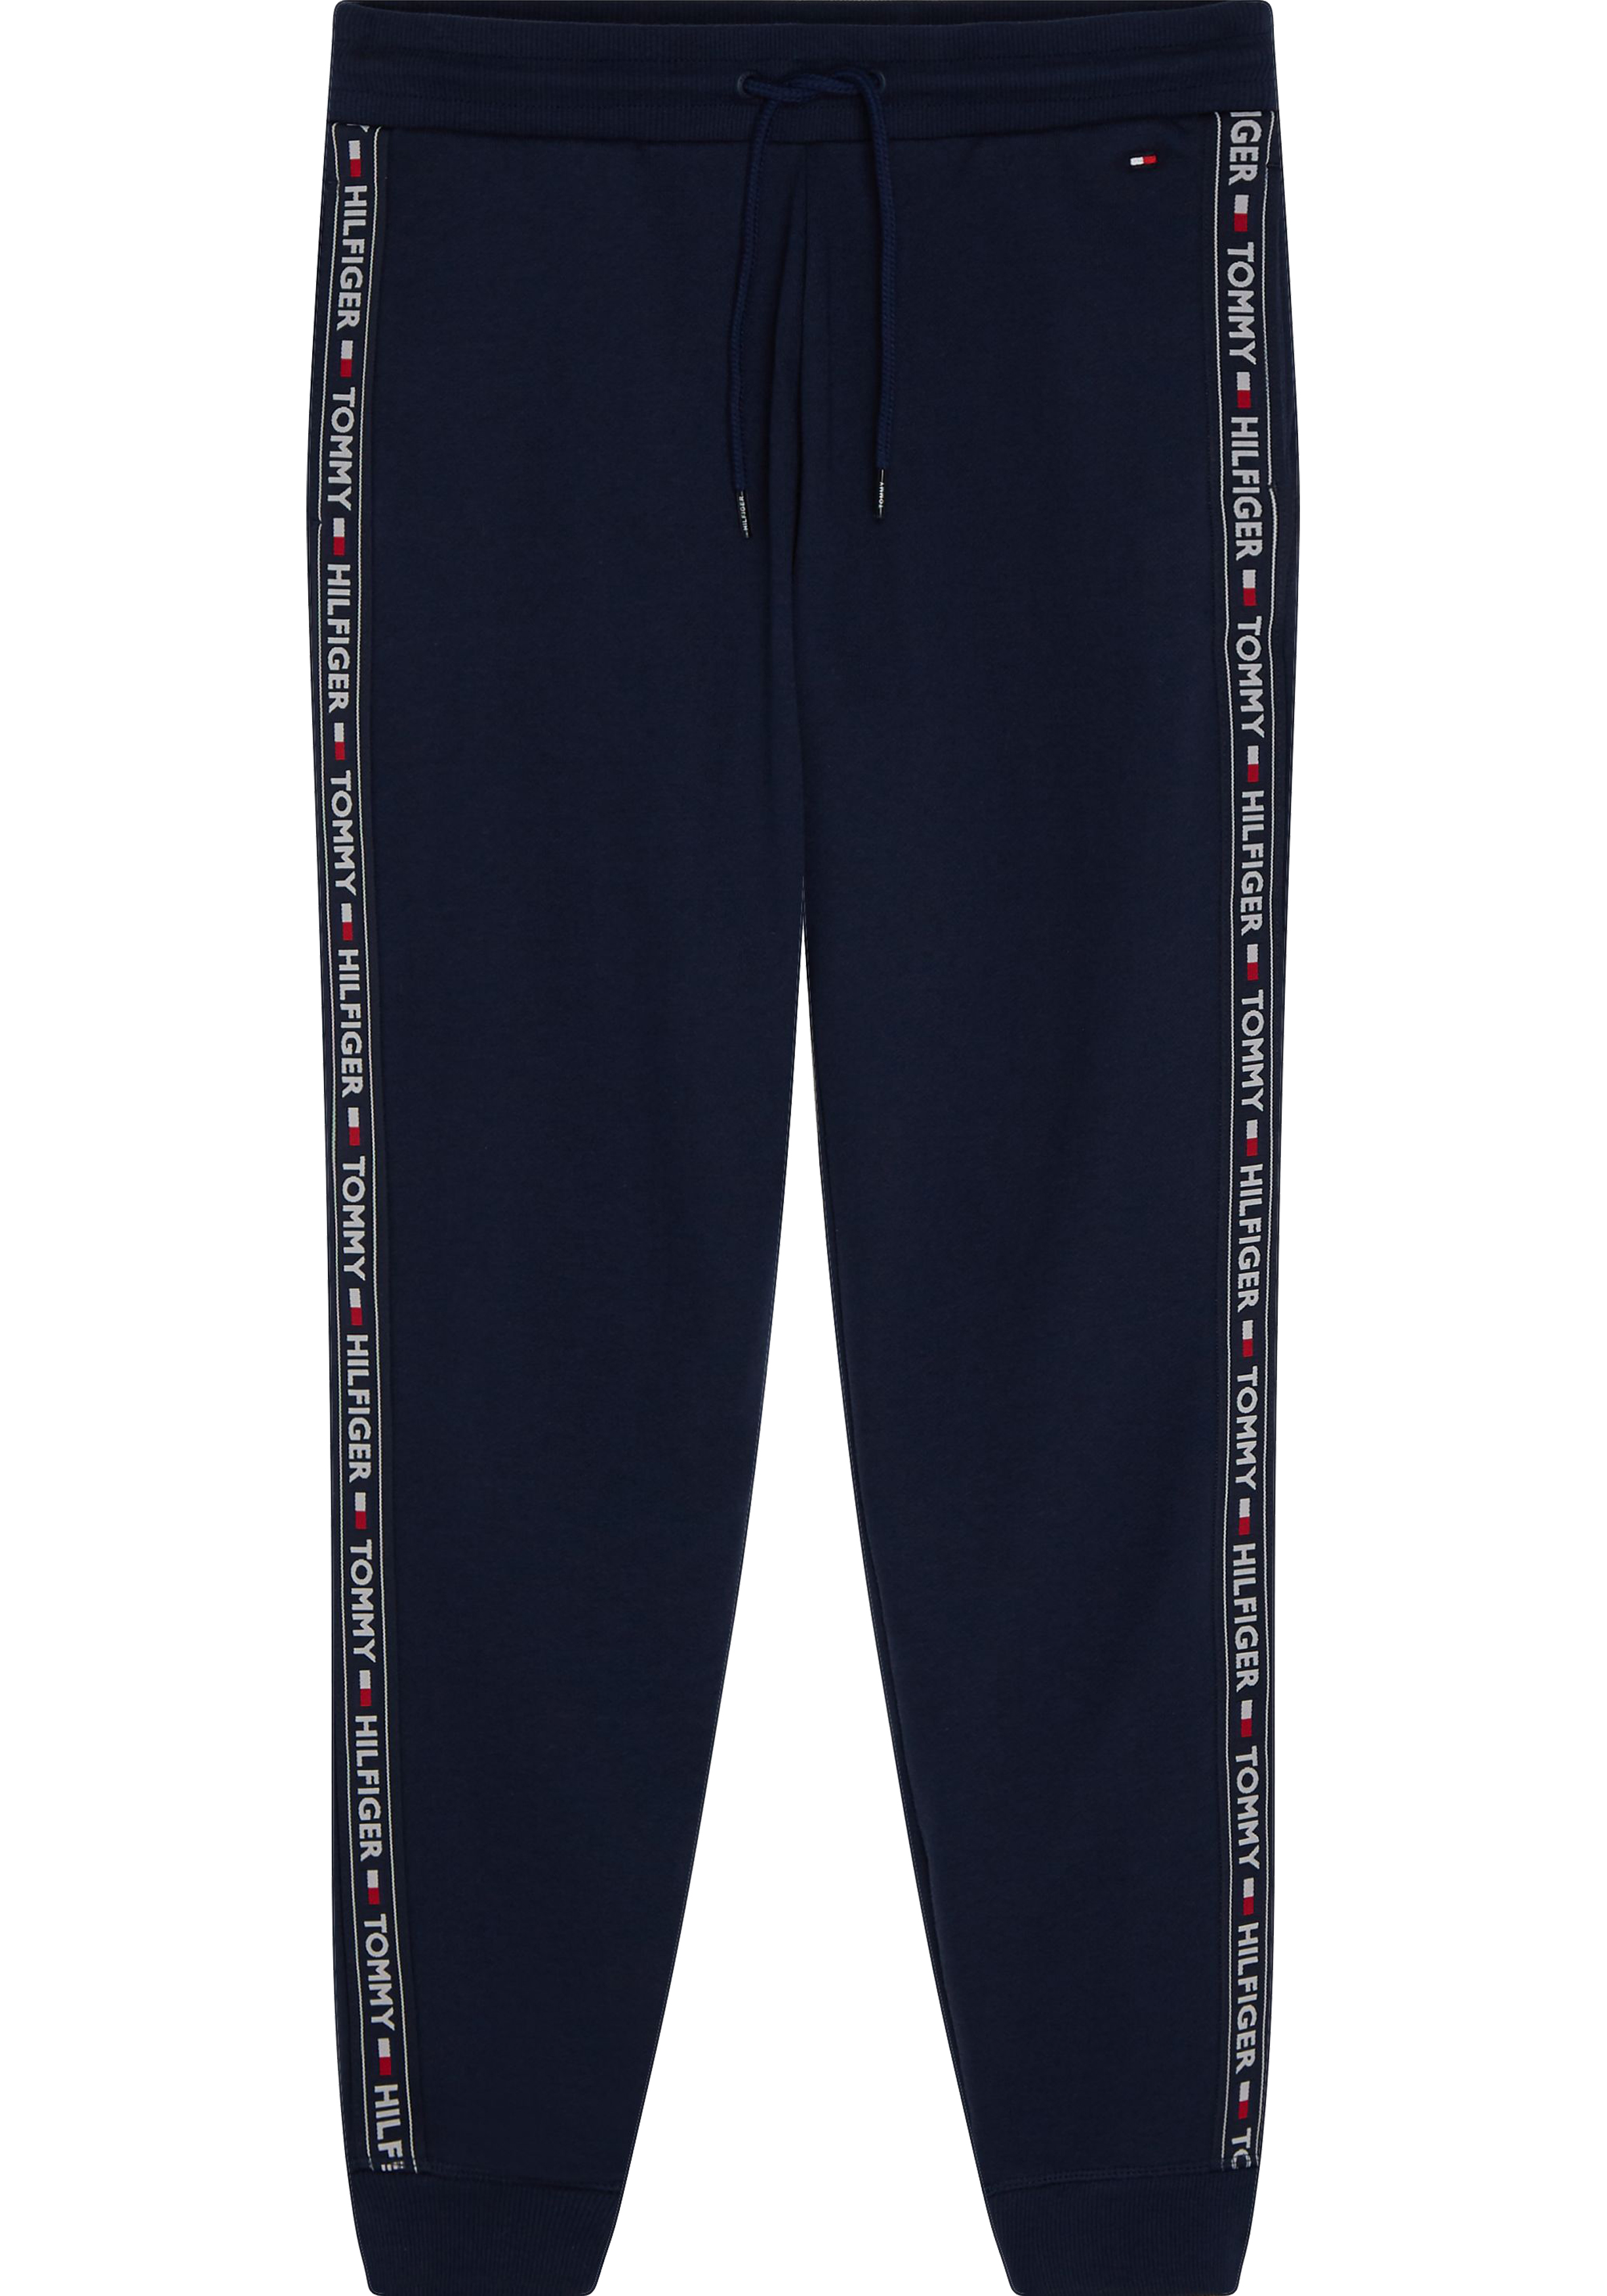 Tommy Hilfiger dames Authentic track pant, joggingbroek normale dikte, donkerblauw